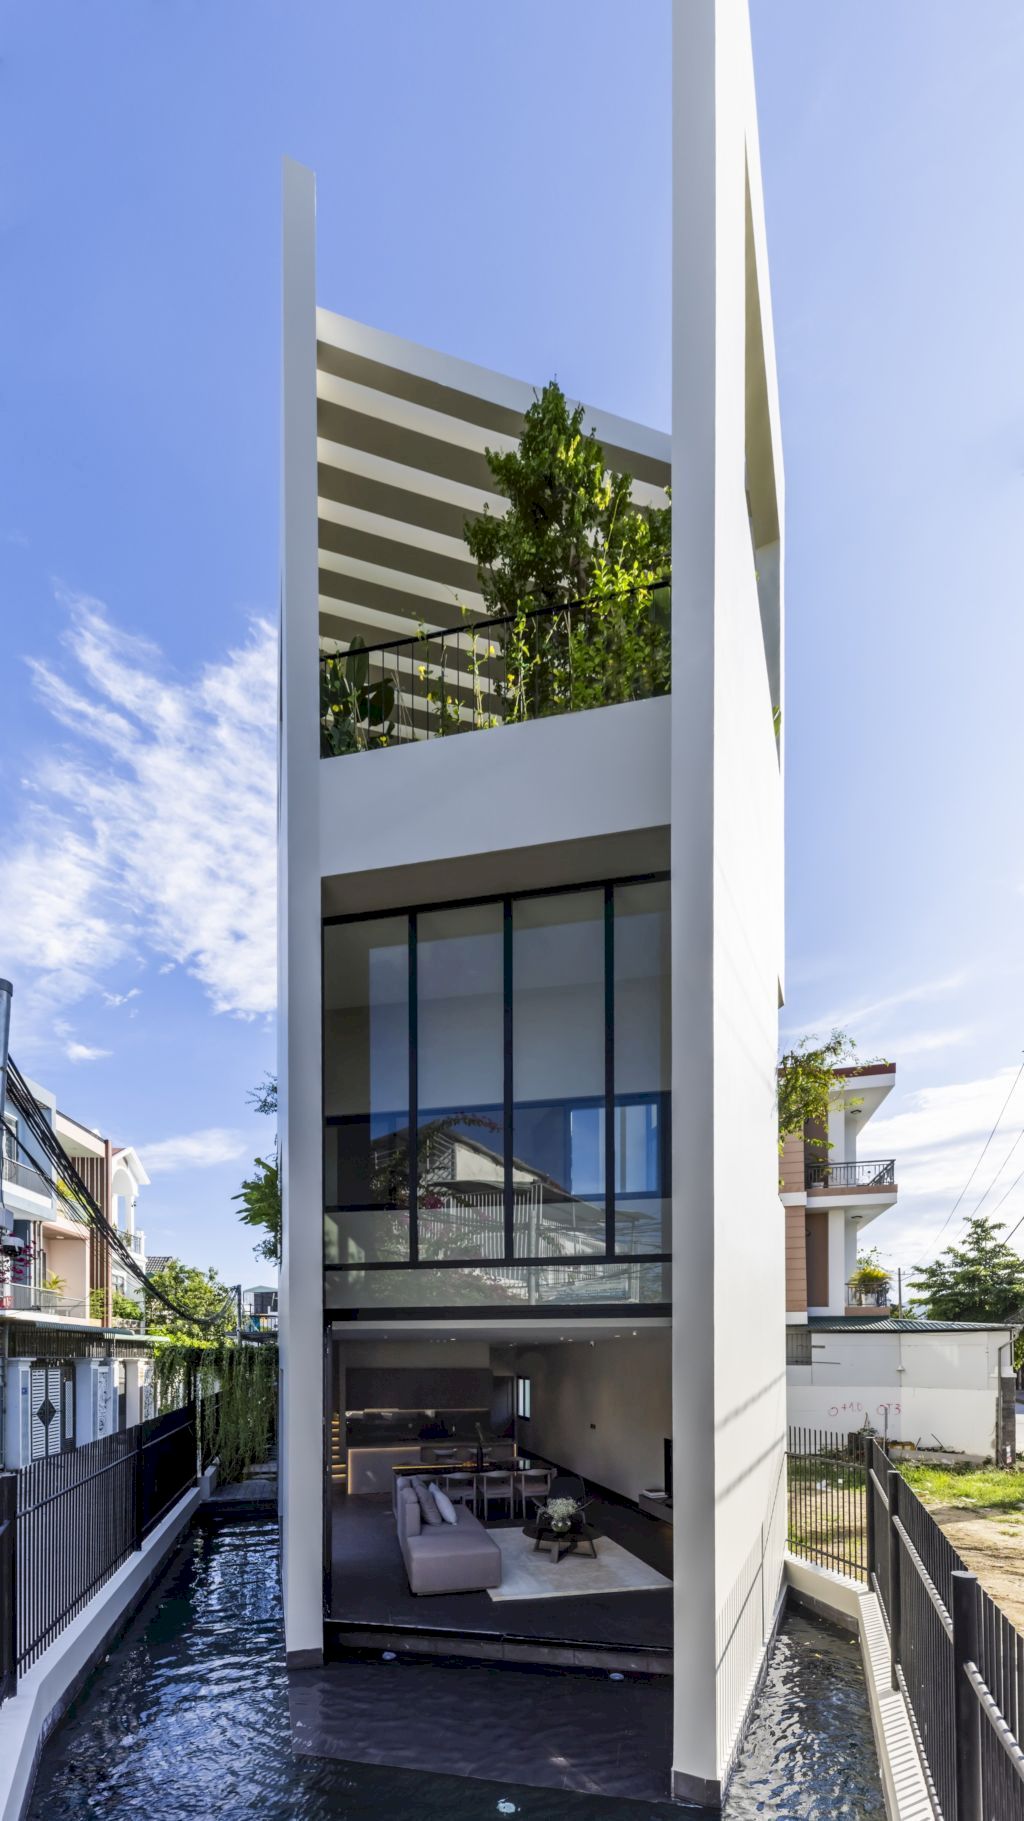 SkyGarden House in Vietnam by Pham Huu Son Architects